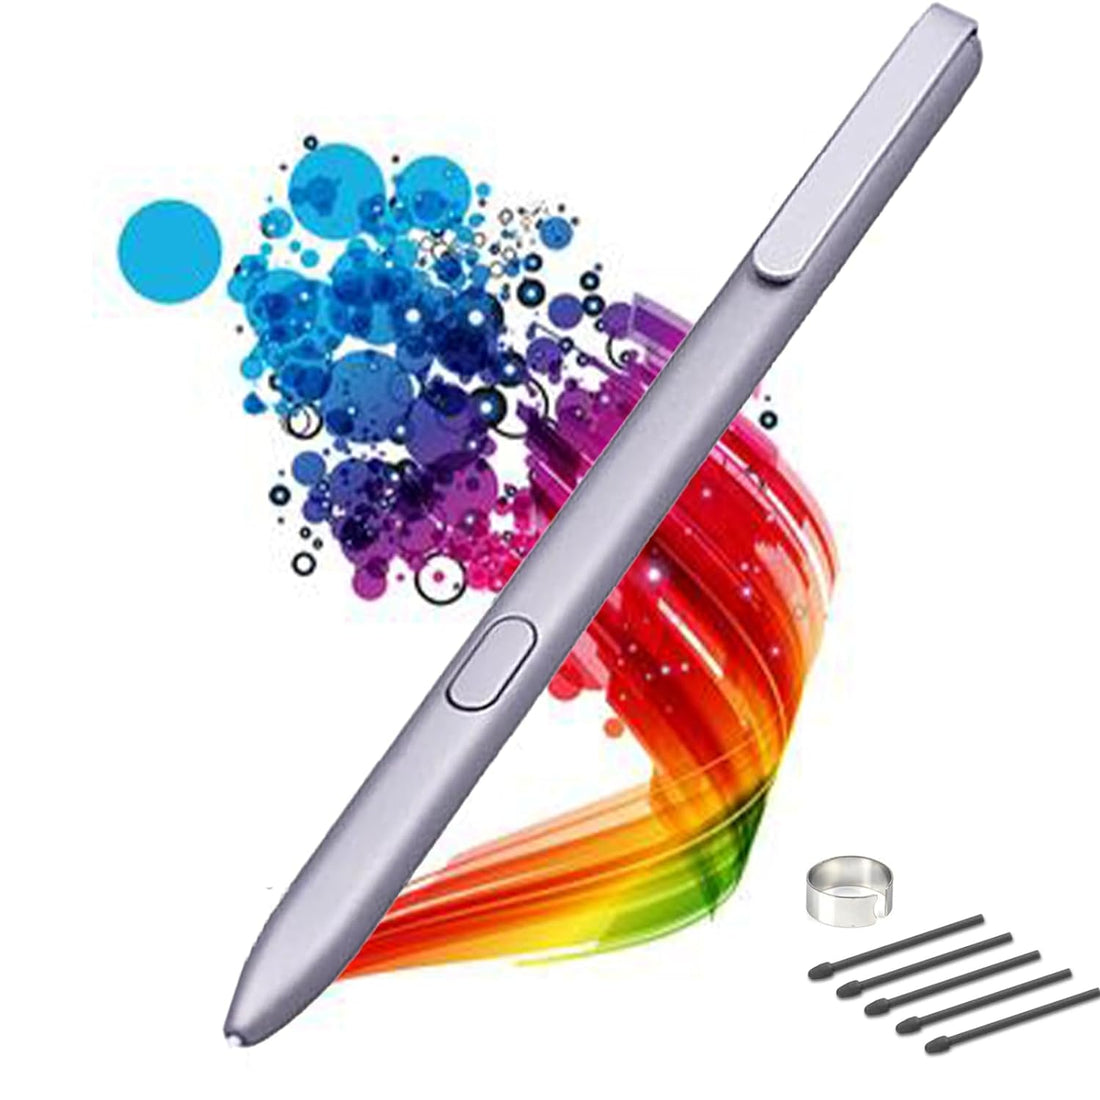 Silvery Marker Pen for Remarkable 1/2 Tablet Notebook, Stylus Marker Pen Replacement,No Charging Needed,No Setup,No Built in Eraser Enhance Your Digital Experience EMR Device Compatible